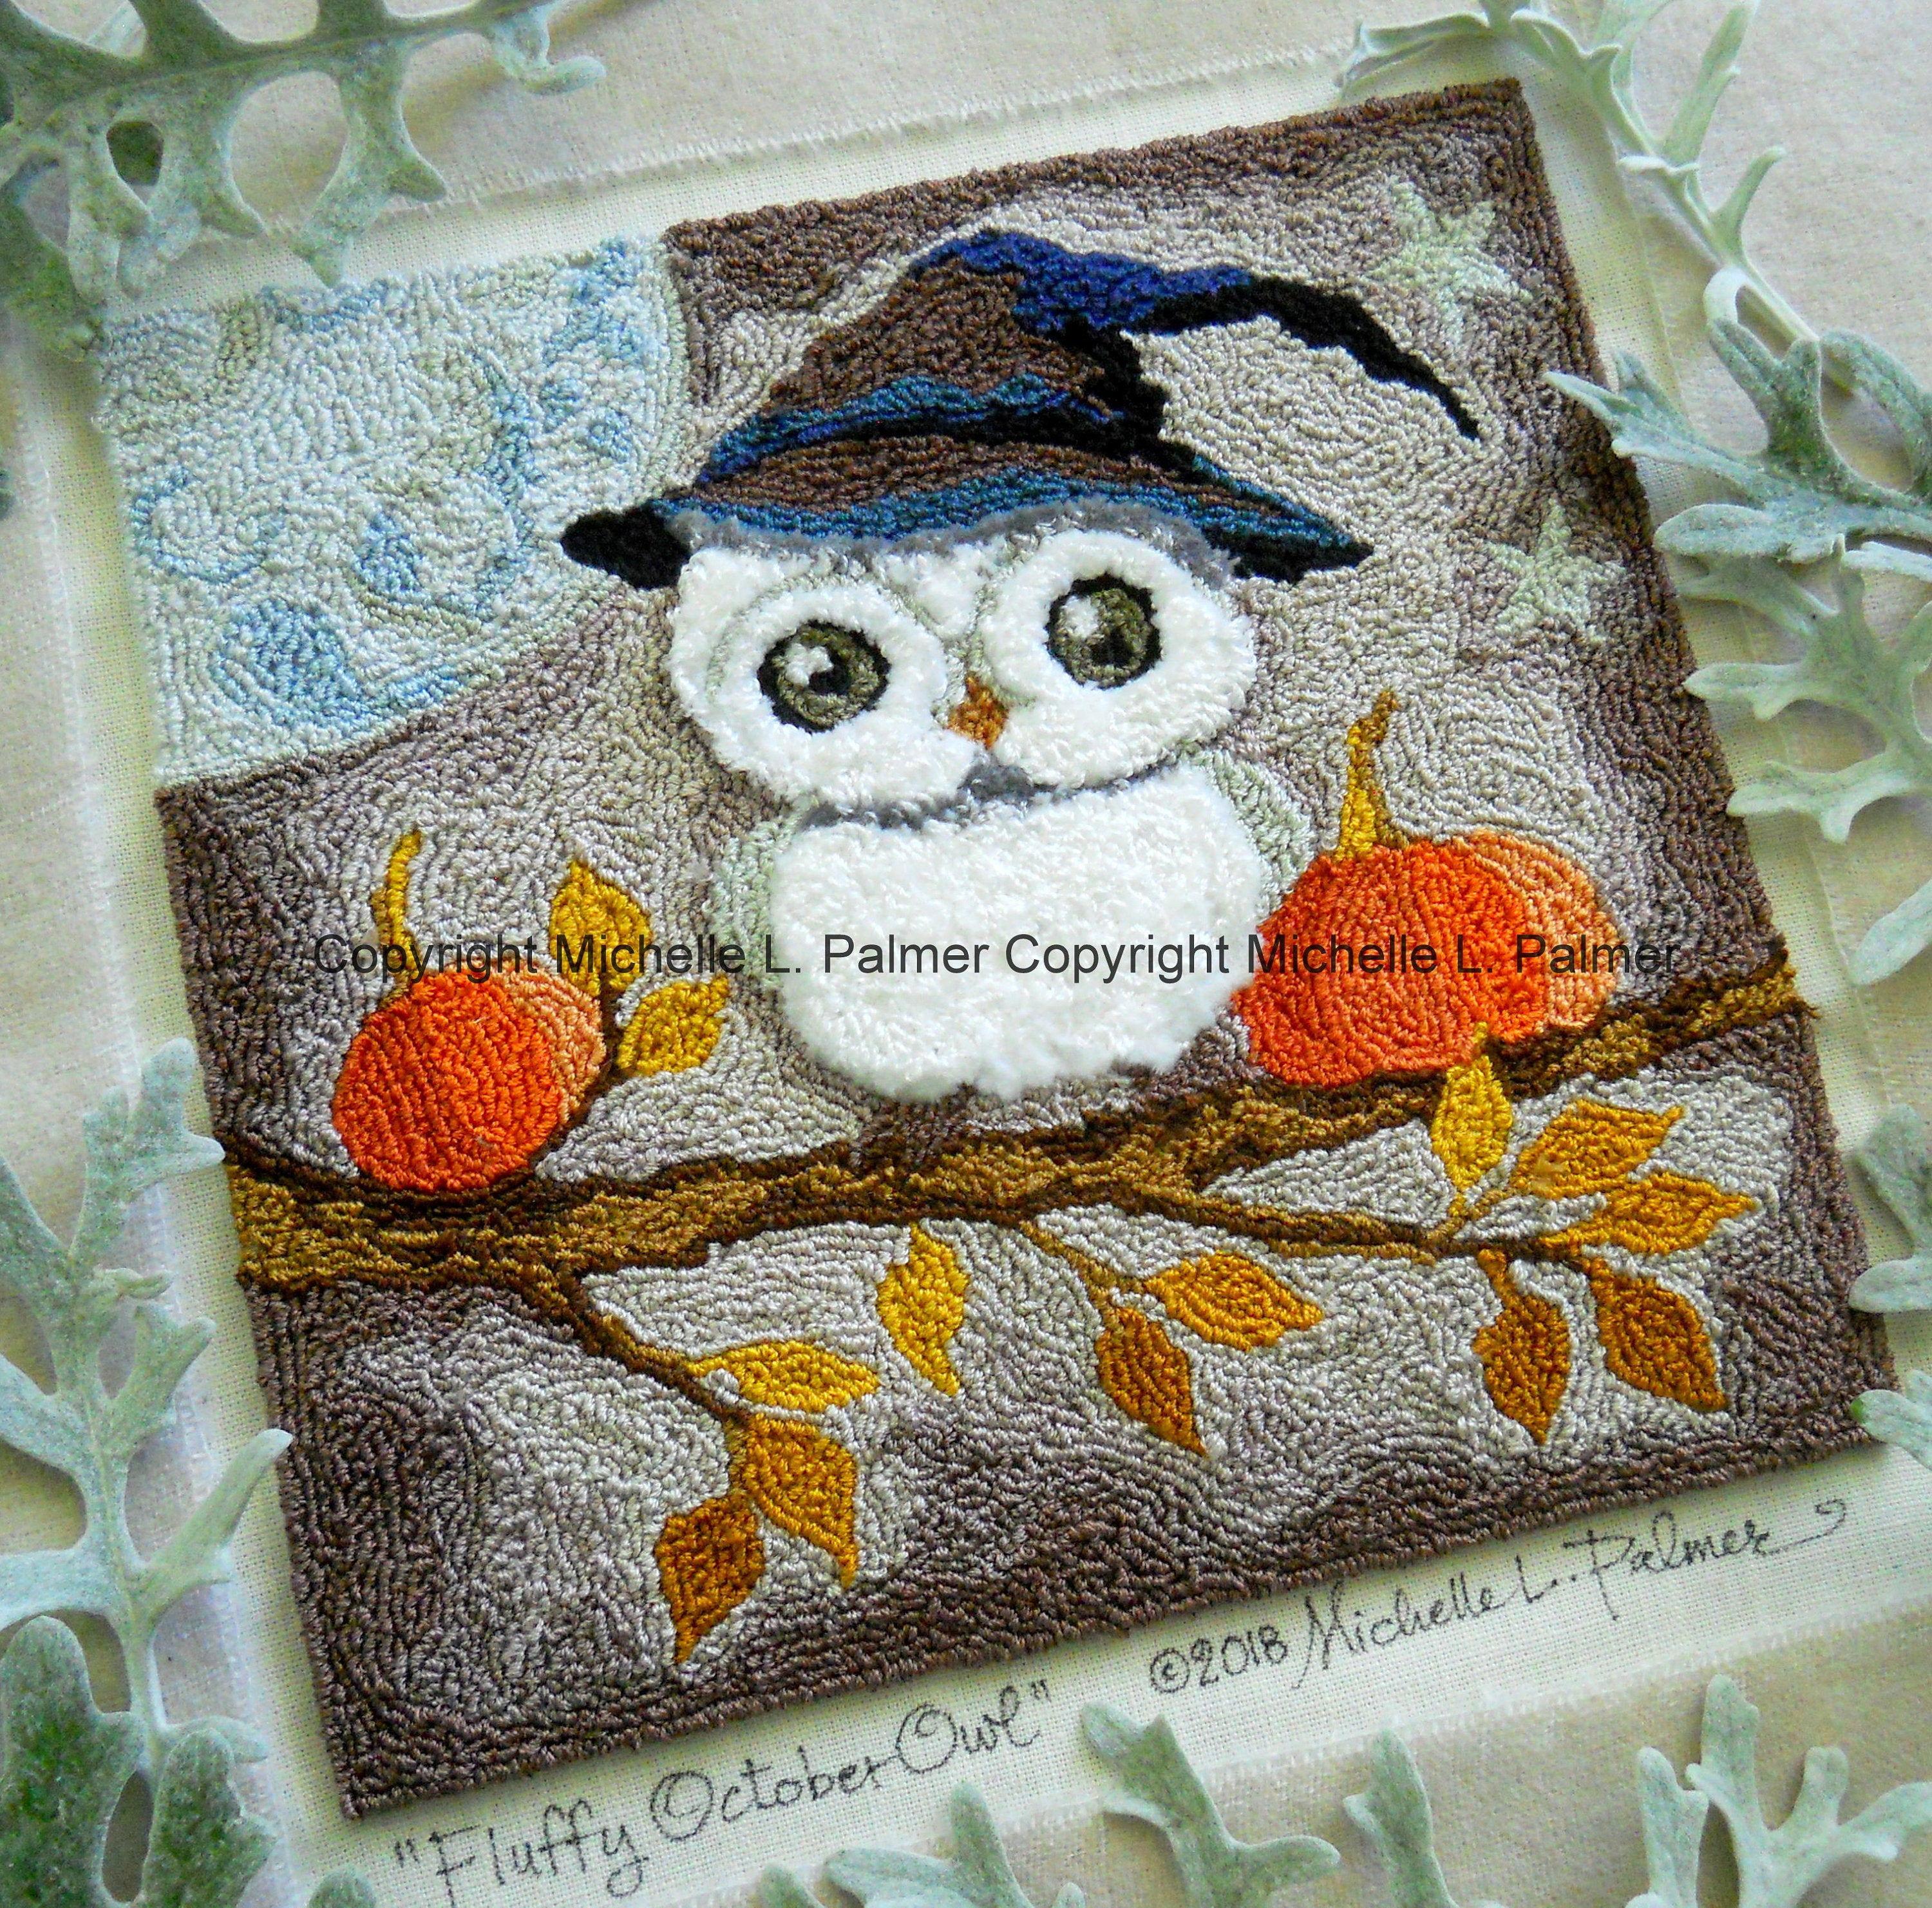 Punch Needle Embroidery Patterns Punch Needle Embroidery Pattern Digital Instant Download Jpeg And Pdf Files Michelle Palmer Velvety White Owl Harvest Hat Pumpkins On A Limb